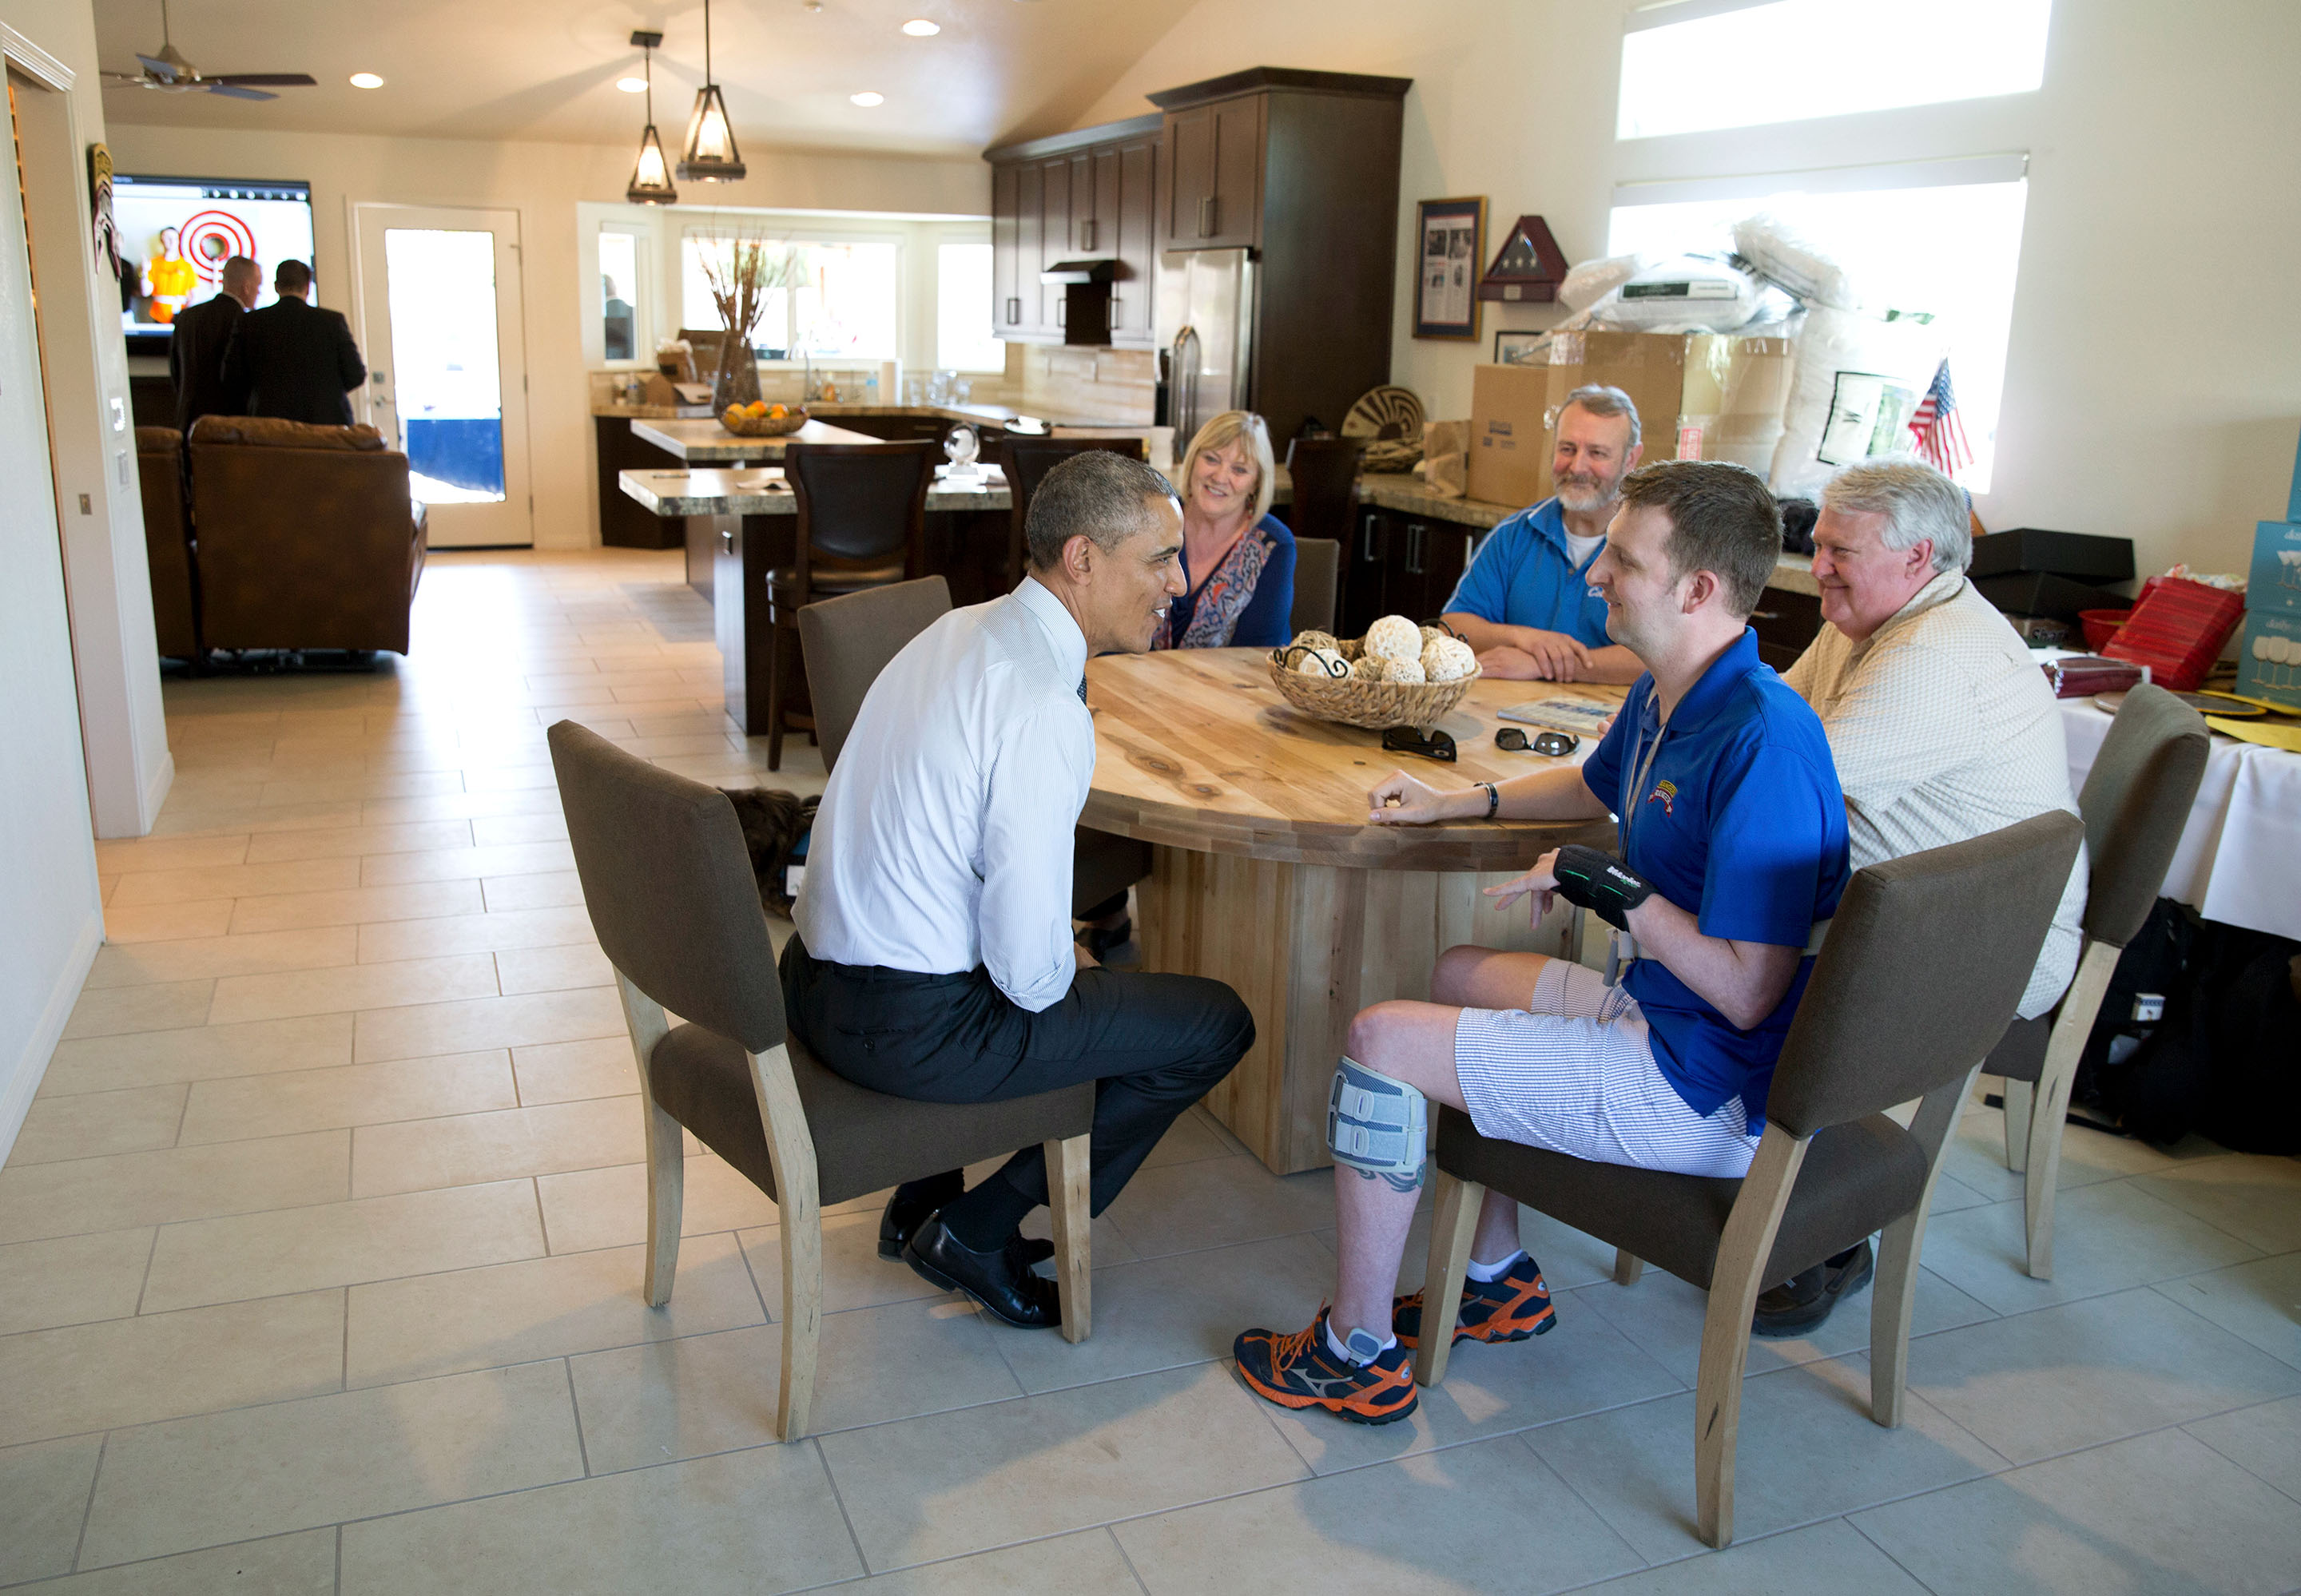 March 13, 2015: President Obama visits with Cory and his family at the kitchen table. (Official White House Photo by Pete Souza)